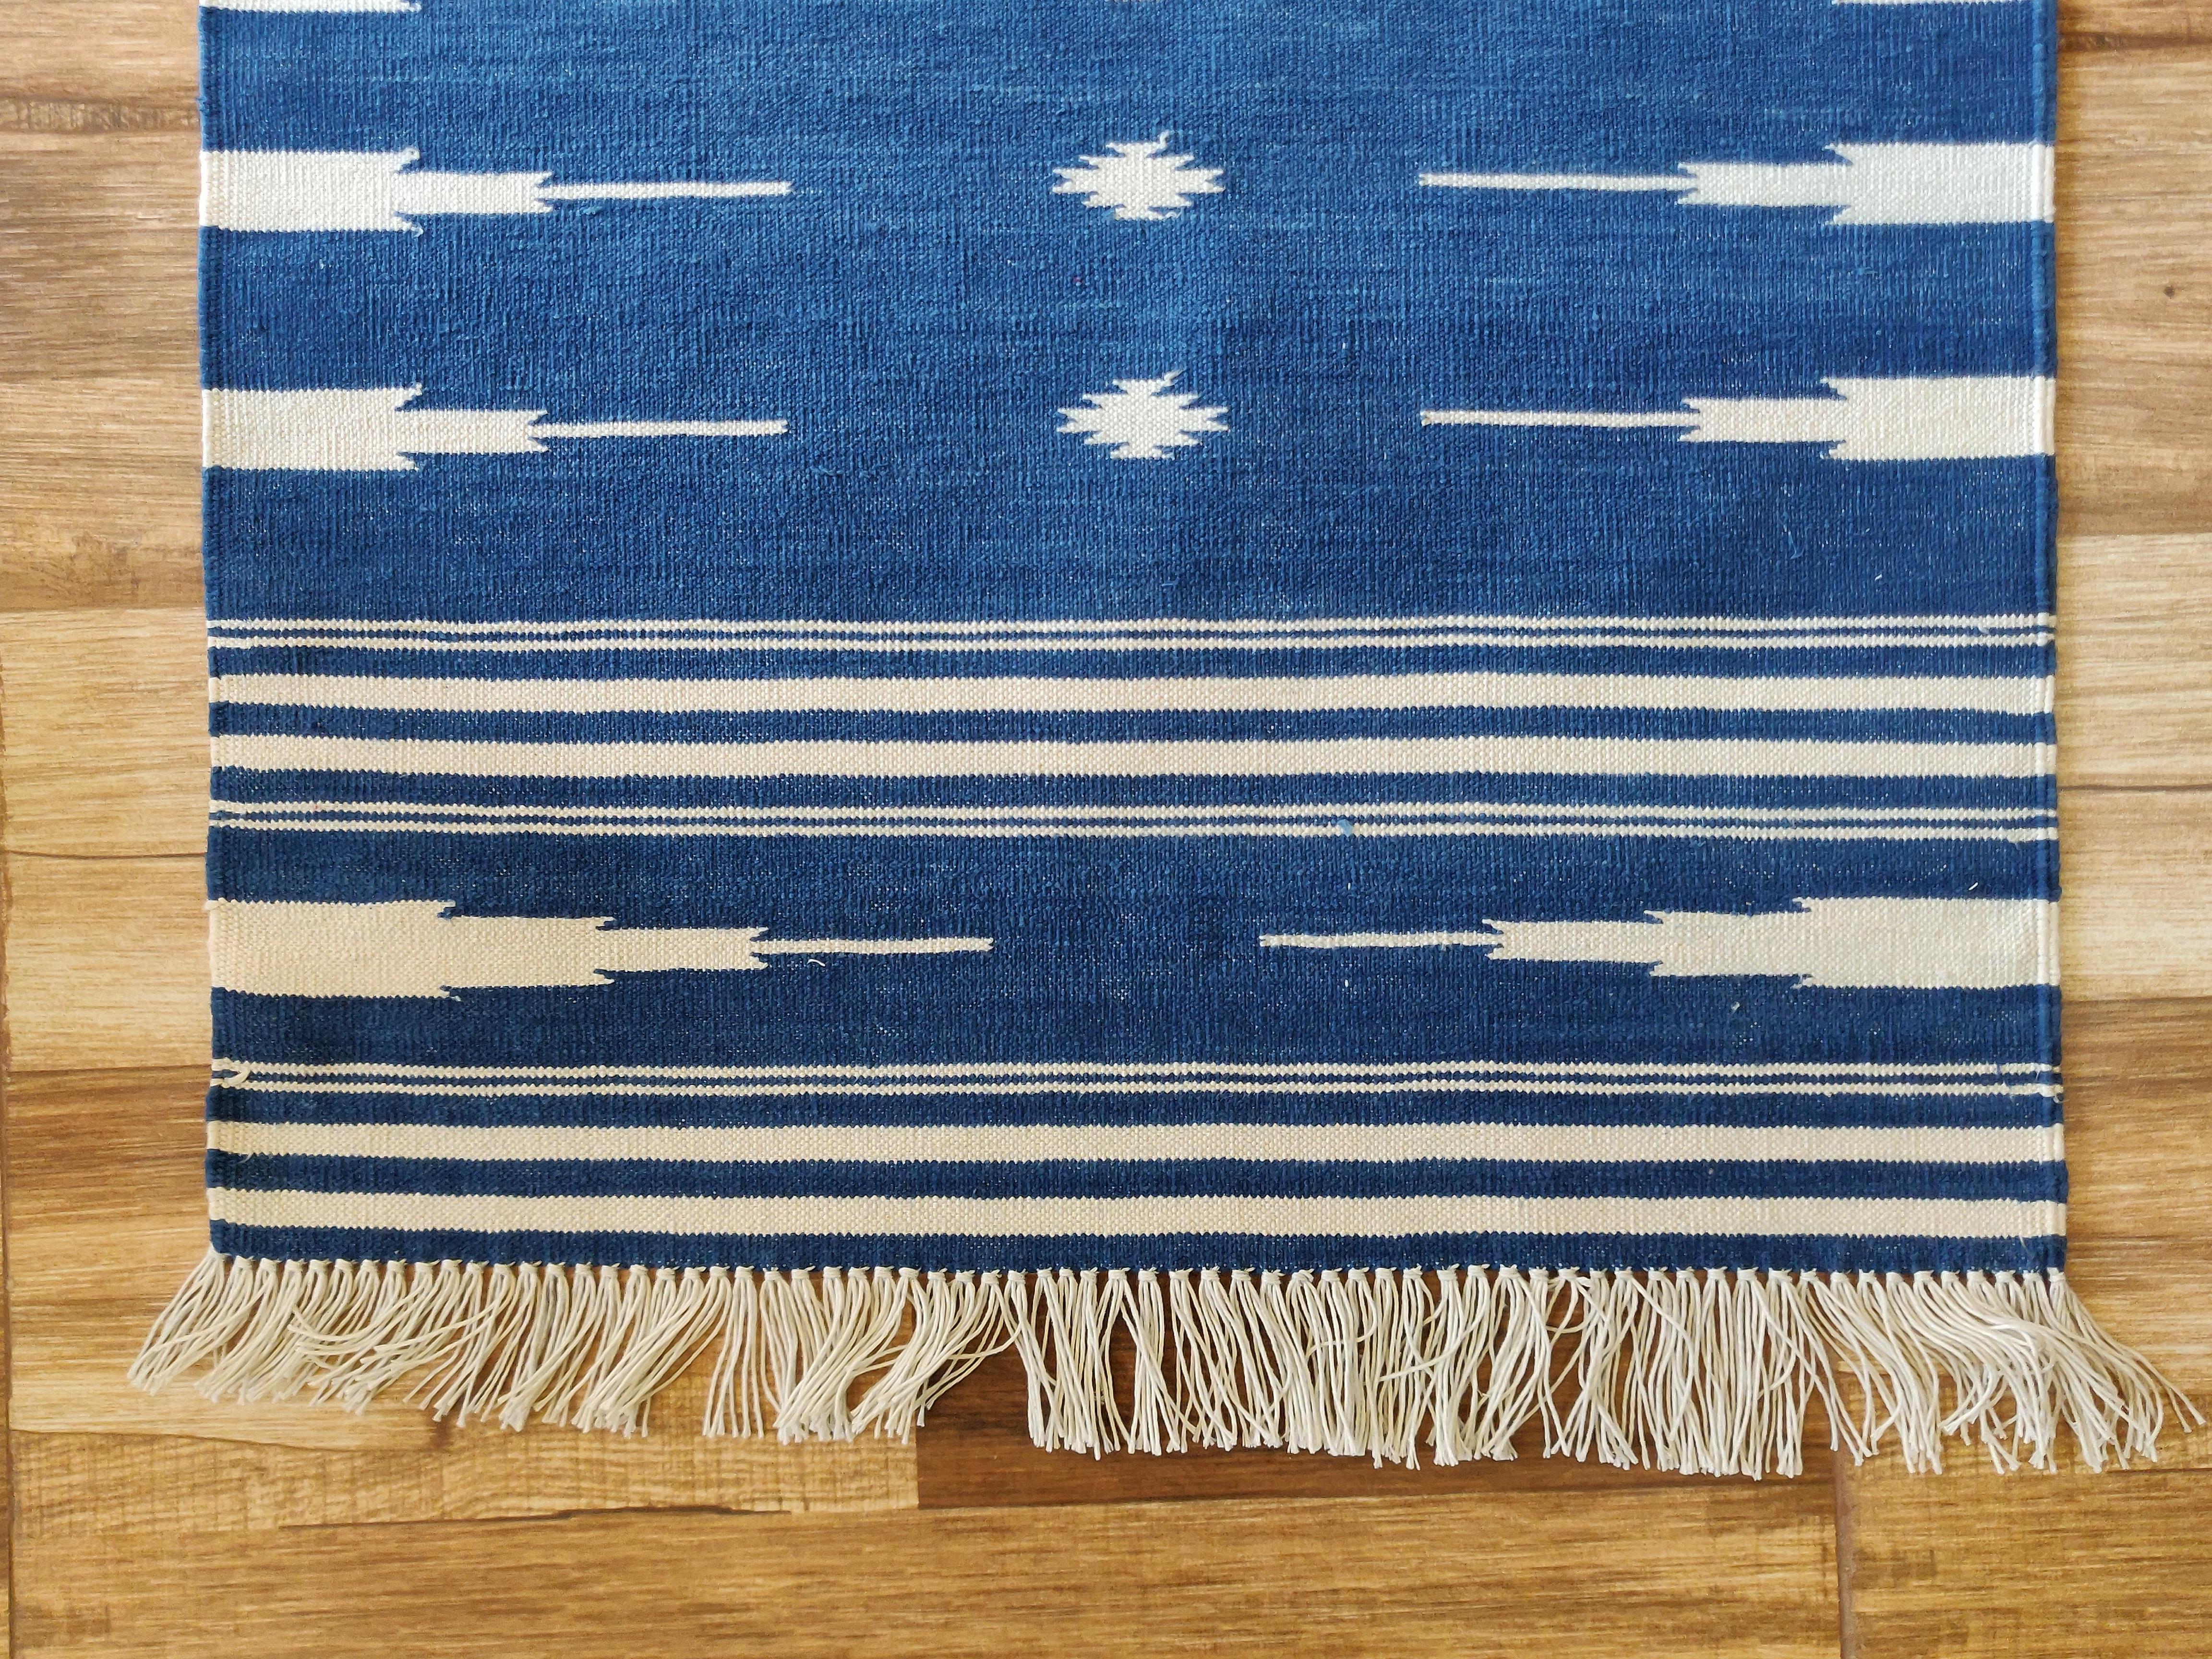 Hand-Woven Handmade Cotton Area Flat Weave Rug, 2x3 Blue And White Striped Indian Dhurrie For Sale